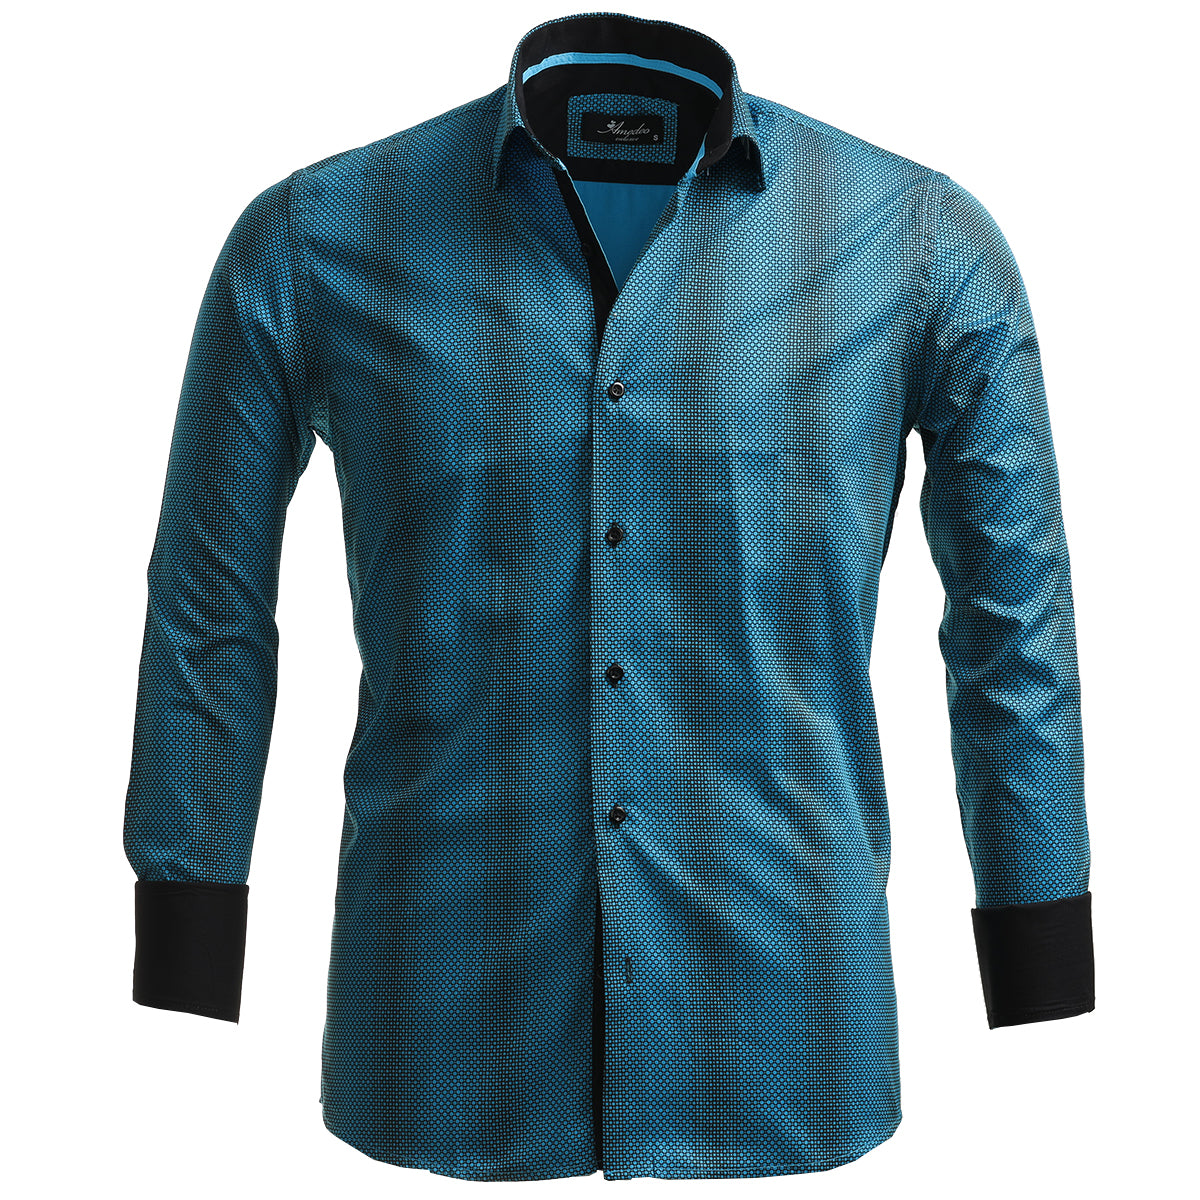 Turquoise Blue Mens Slim Fit French Cuff Shirts with Cufflink Holes - Casual and Formal